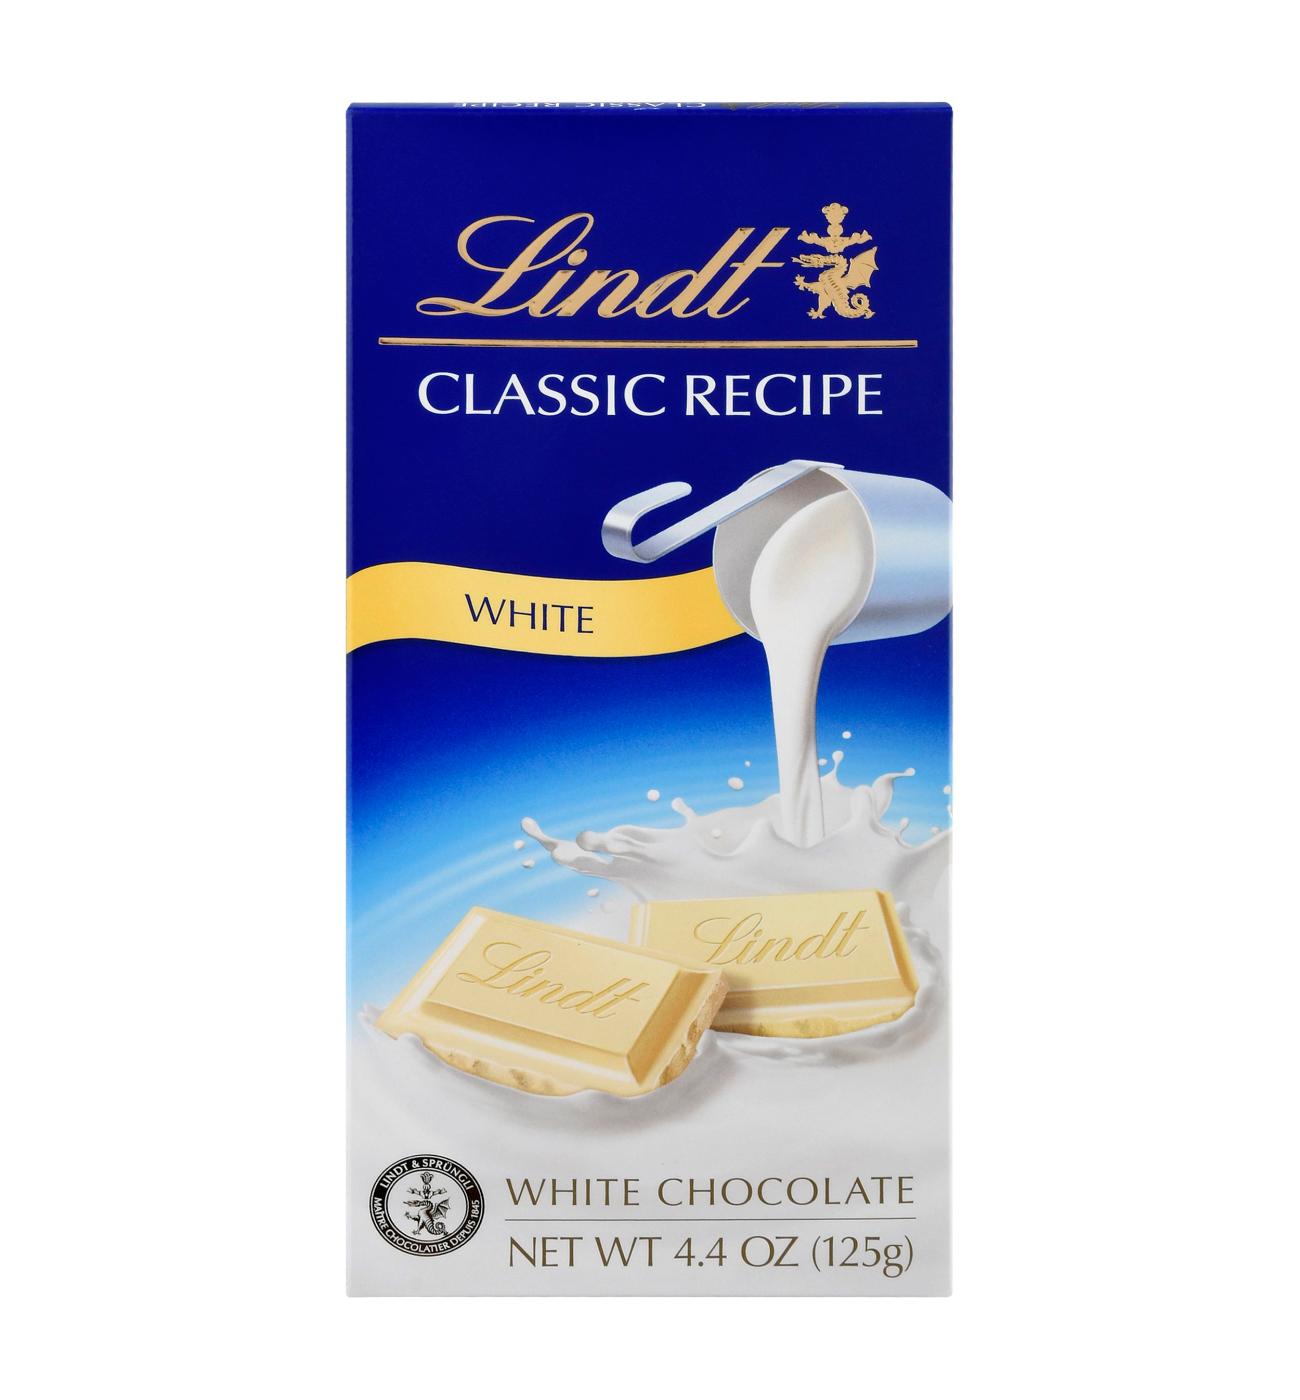 Lindt Classic Recipes White Chocolate Bar; image 1 of 2